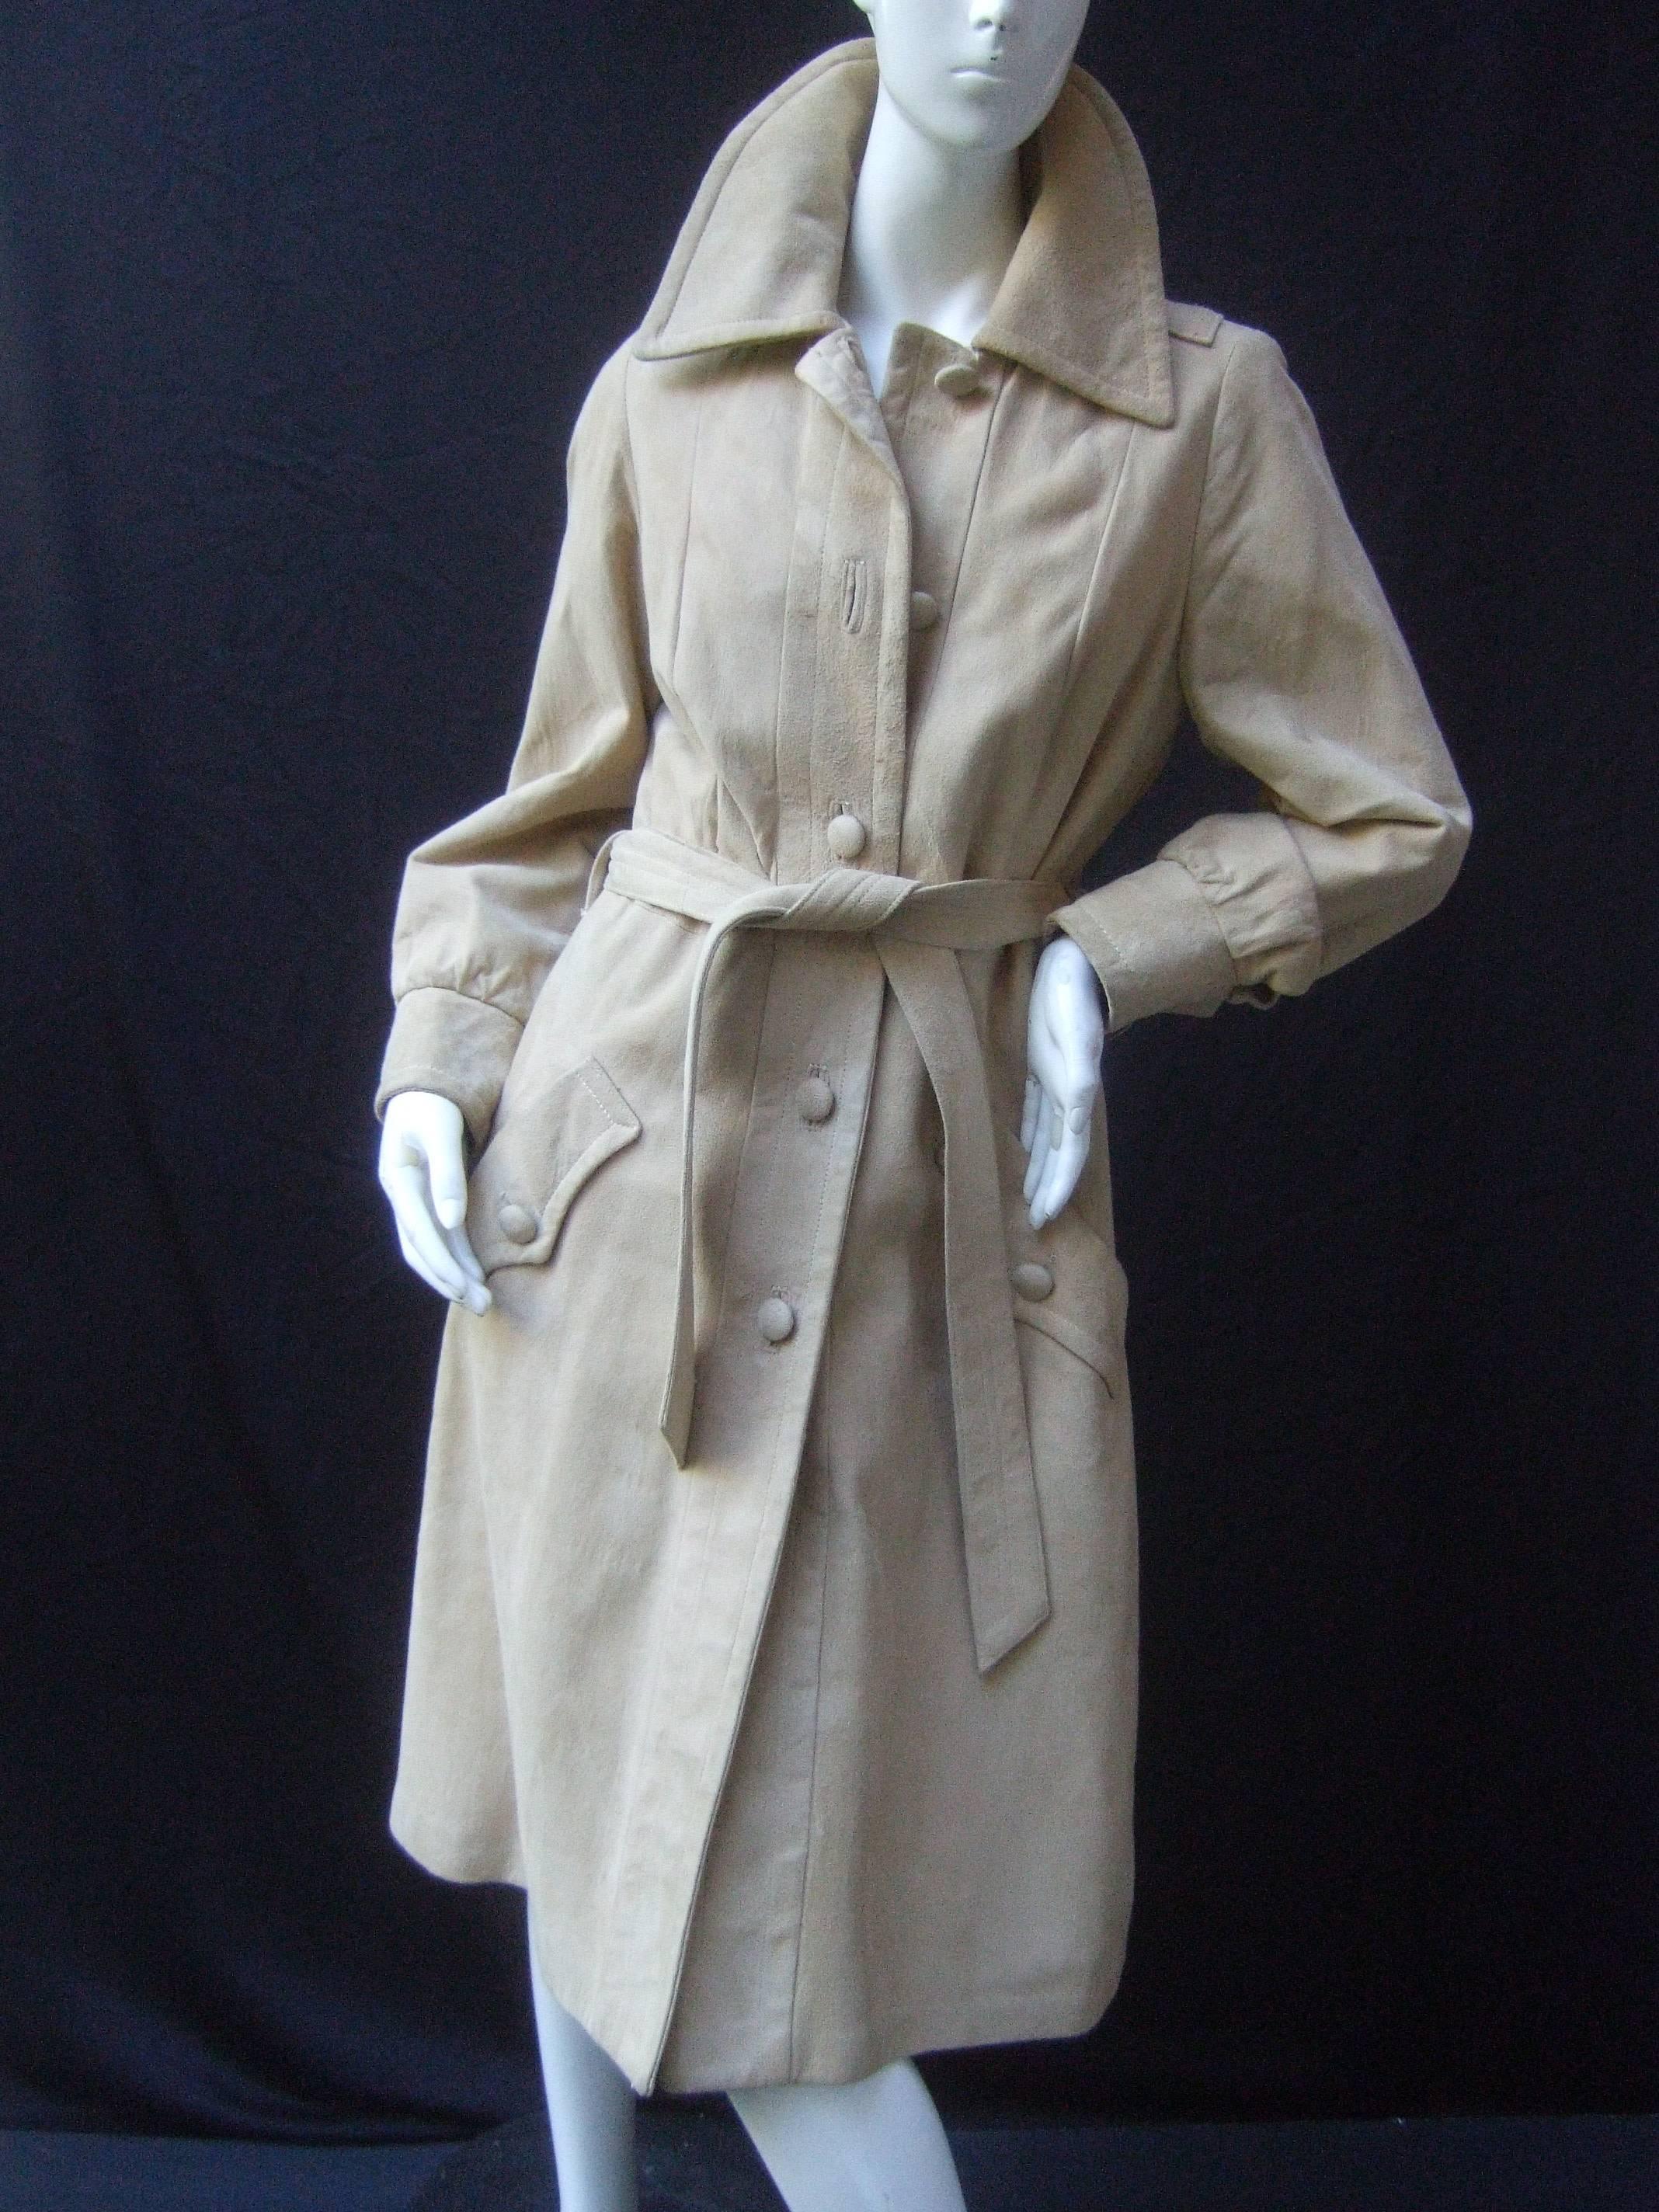 Women's 1970s Plush Tan Doeskin Suede Belted Trench Coat